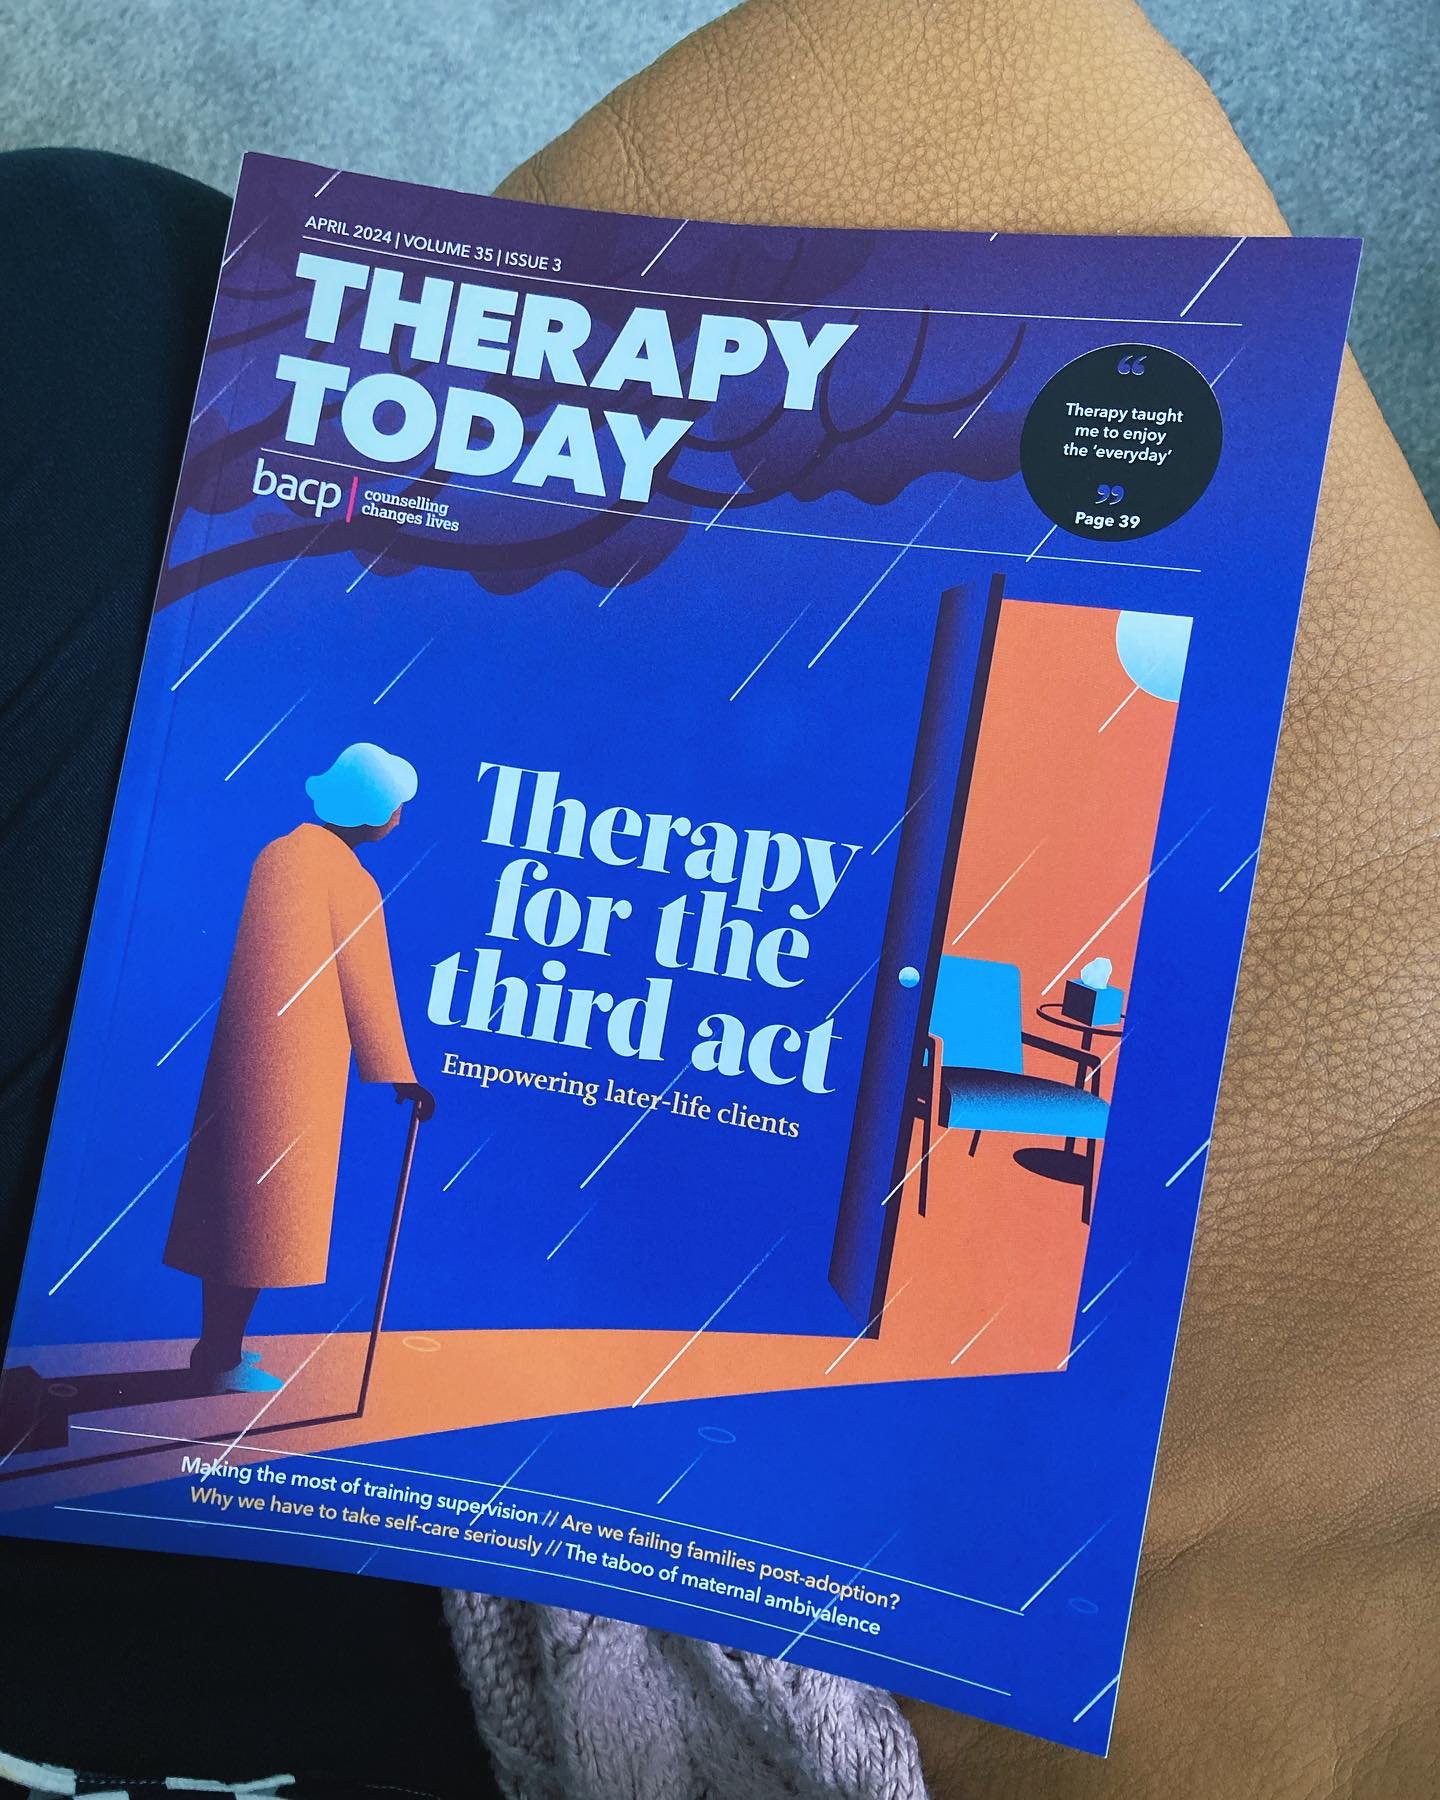 Let&rsquo;s review Therapy Today lead article: Therapy for the third act- empowering later life clients&hellip;.

So nowadays I seem to end up working with clients in their 20s and 30s (mostly). But on placement I saw a lot of older clients. The olde